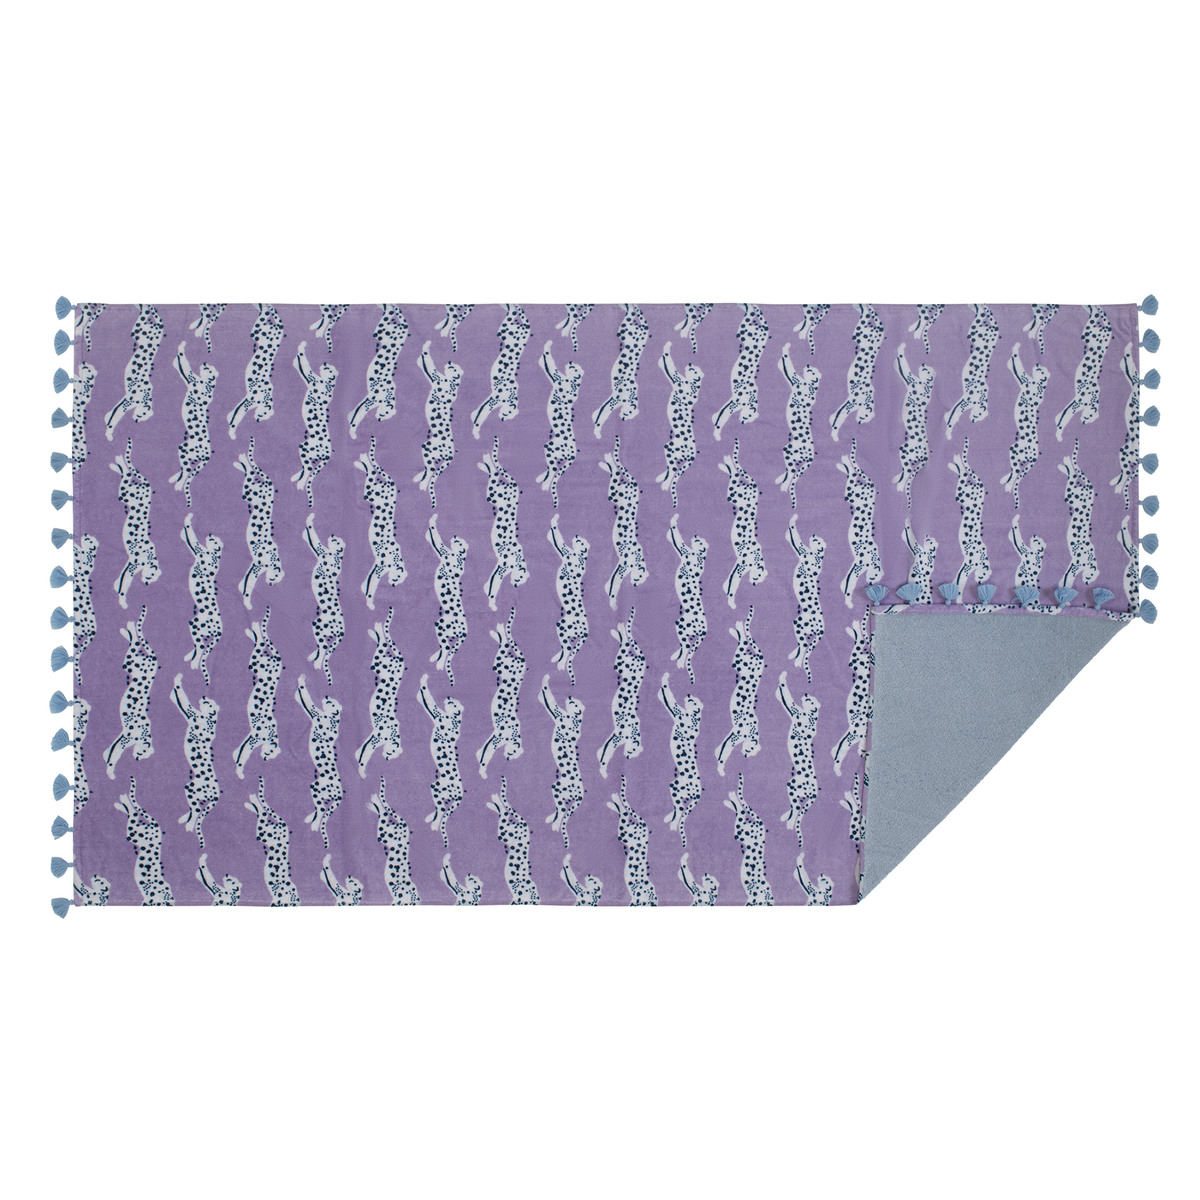 Flat Silo of Matouk Leaping Leopard Beach Towels in Color Lilac